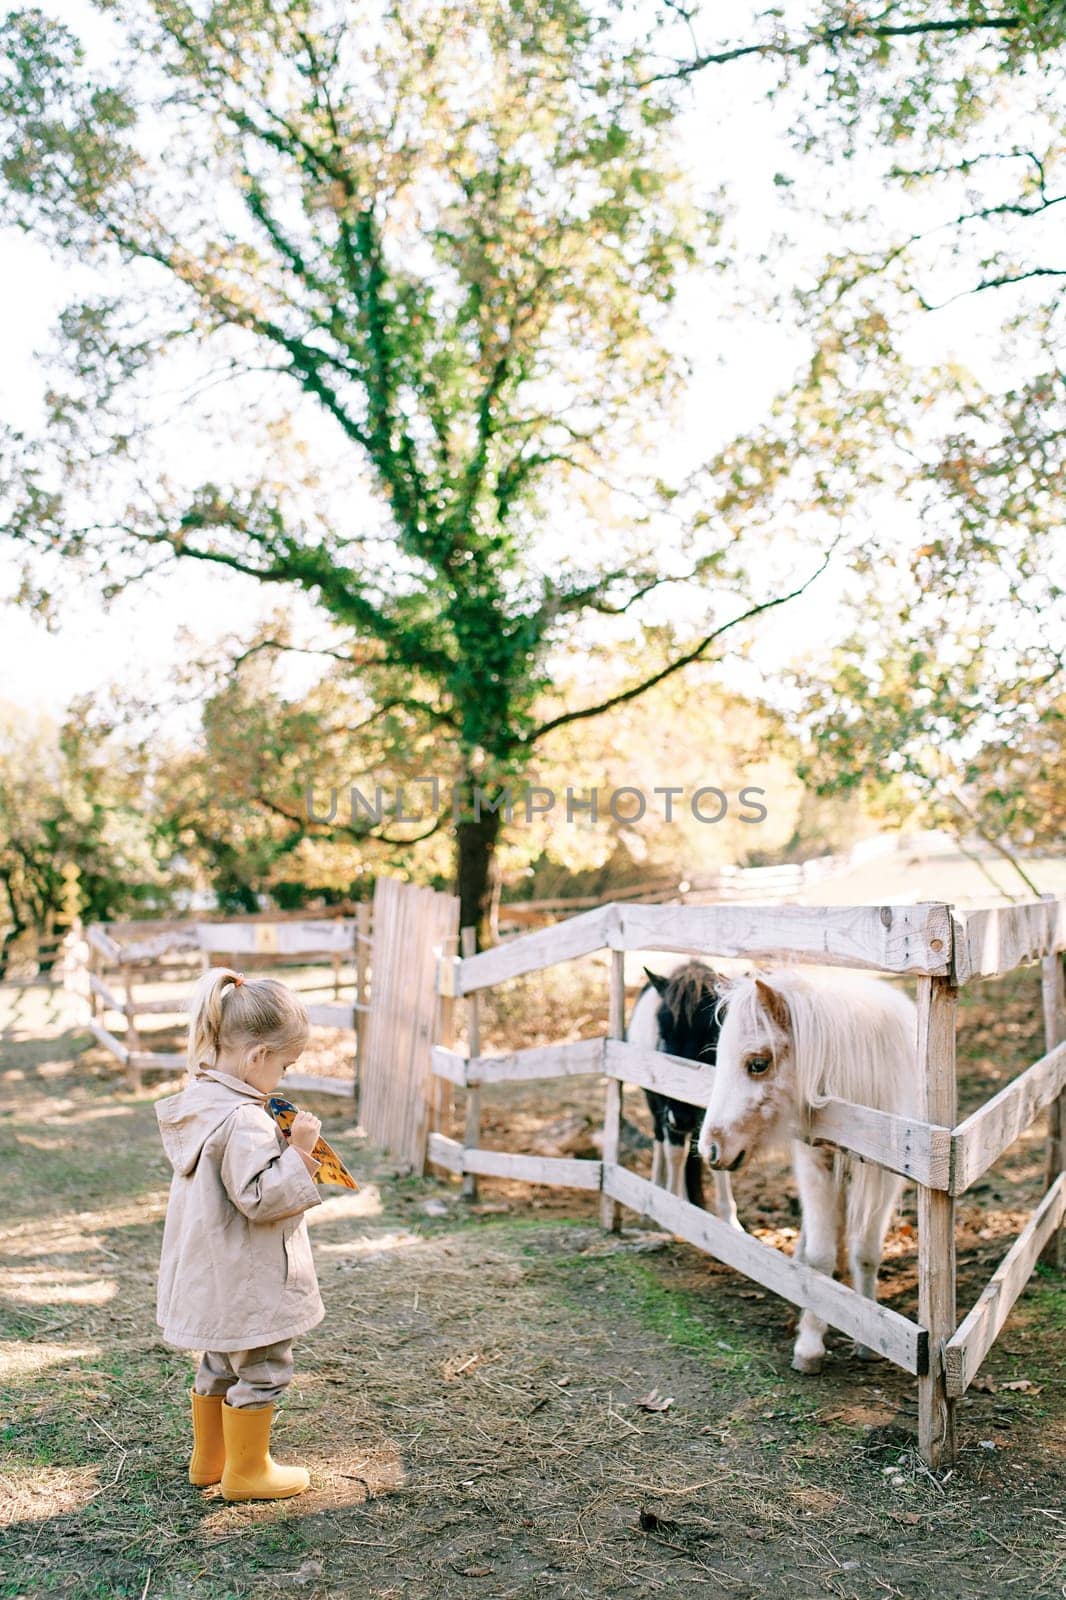 Little girl shows a picture book to a pony peeking out from behind a fence. High quality photo